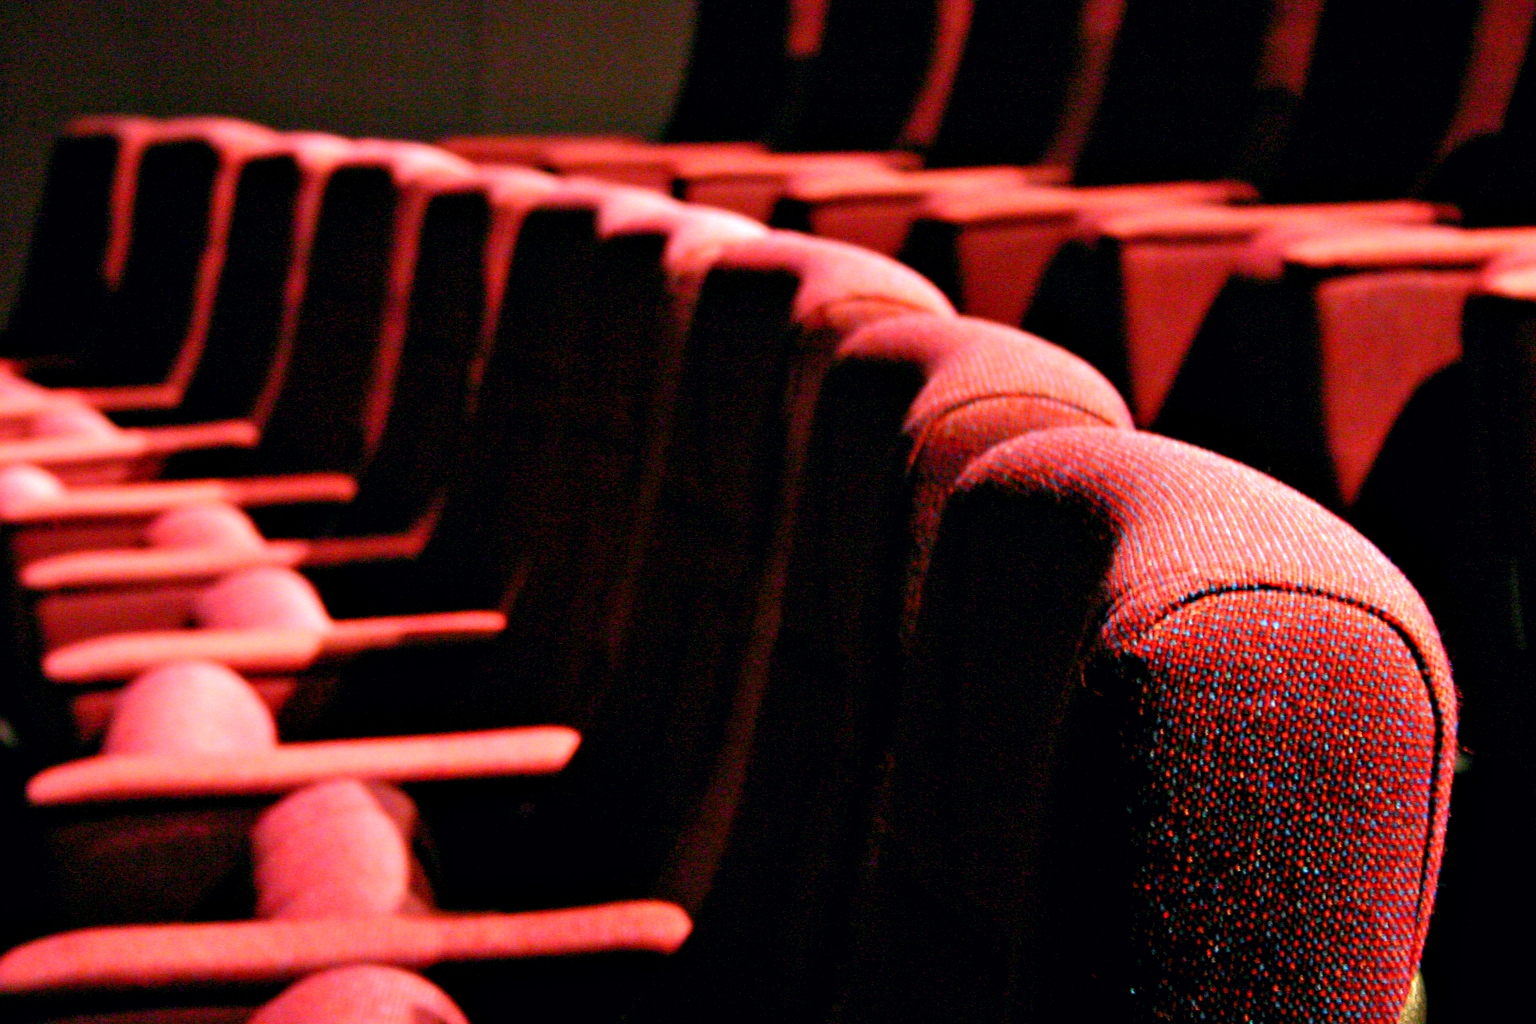 theater-seats-1513151a